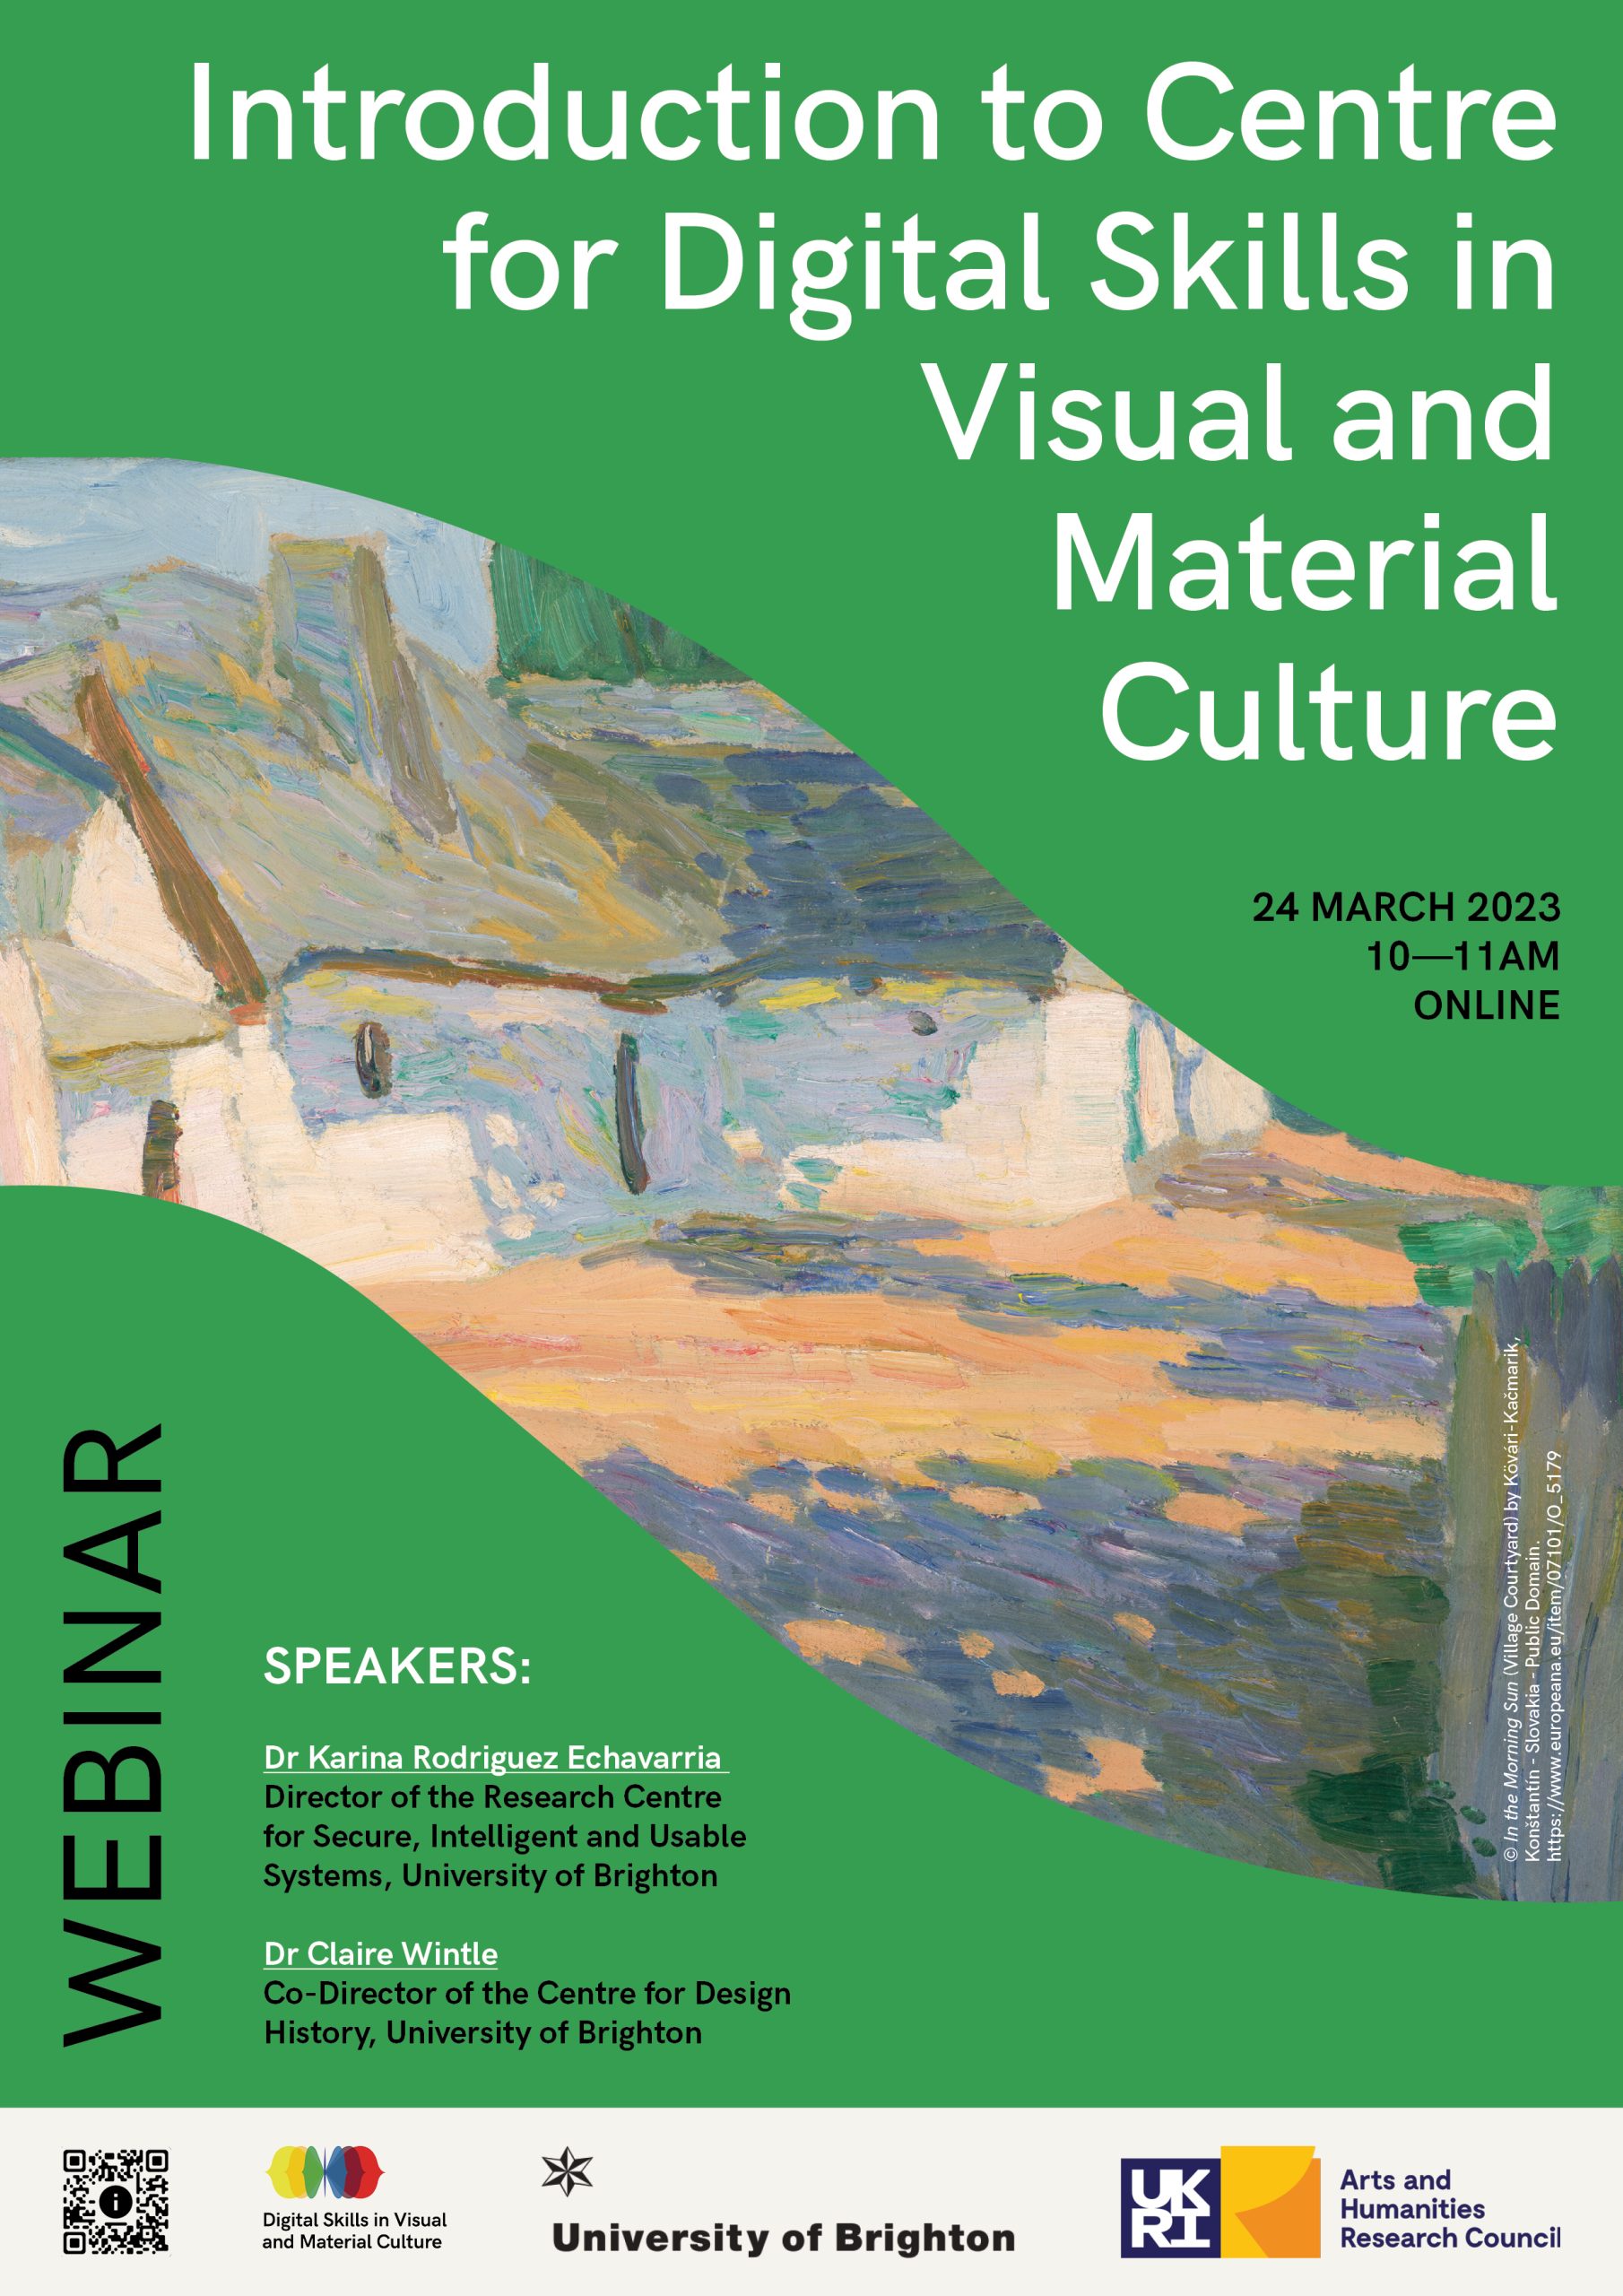 Webinar: Introduction to Digital Skills in Visual and Material Culture | March 24, 10:00-11:00am